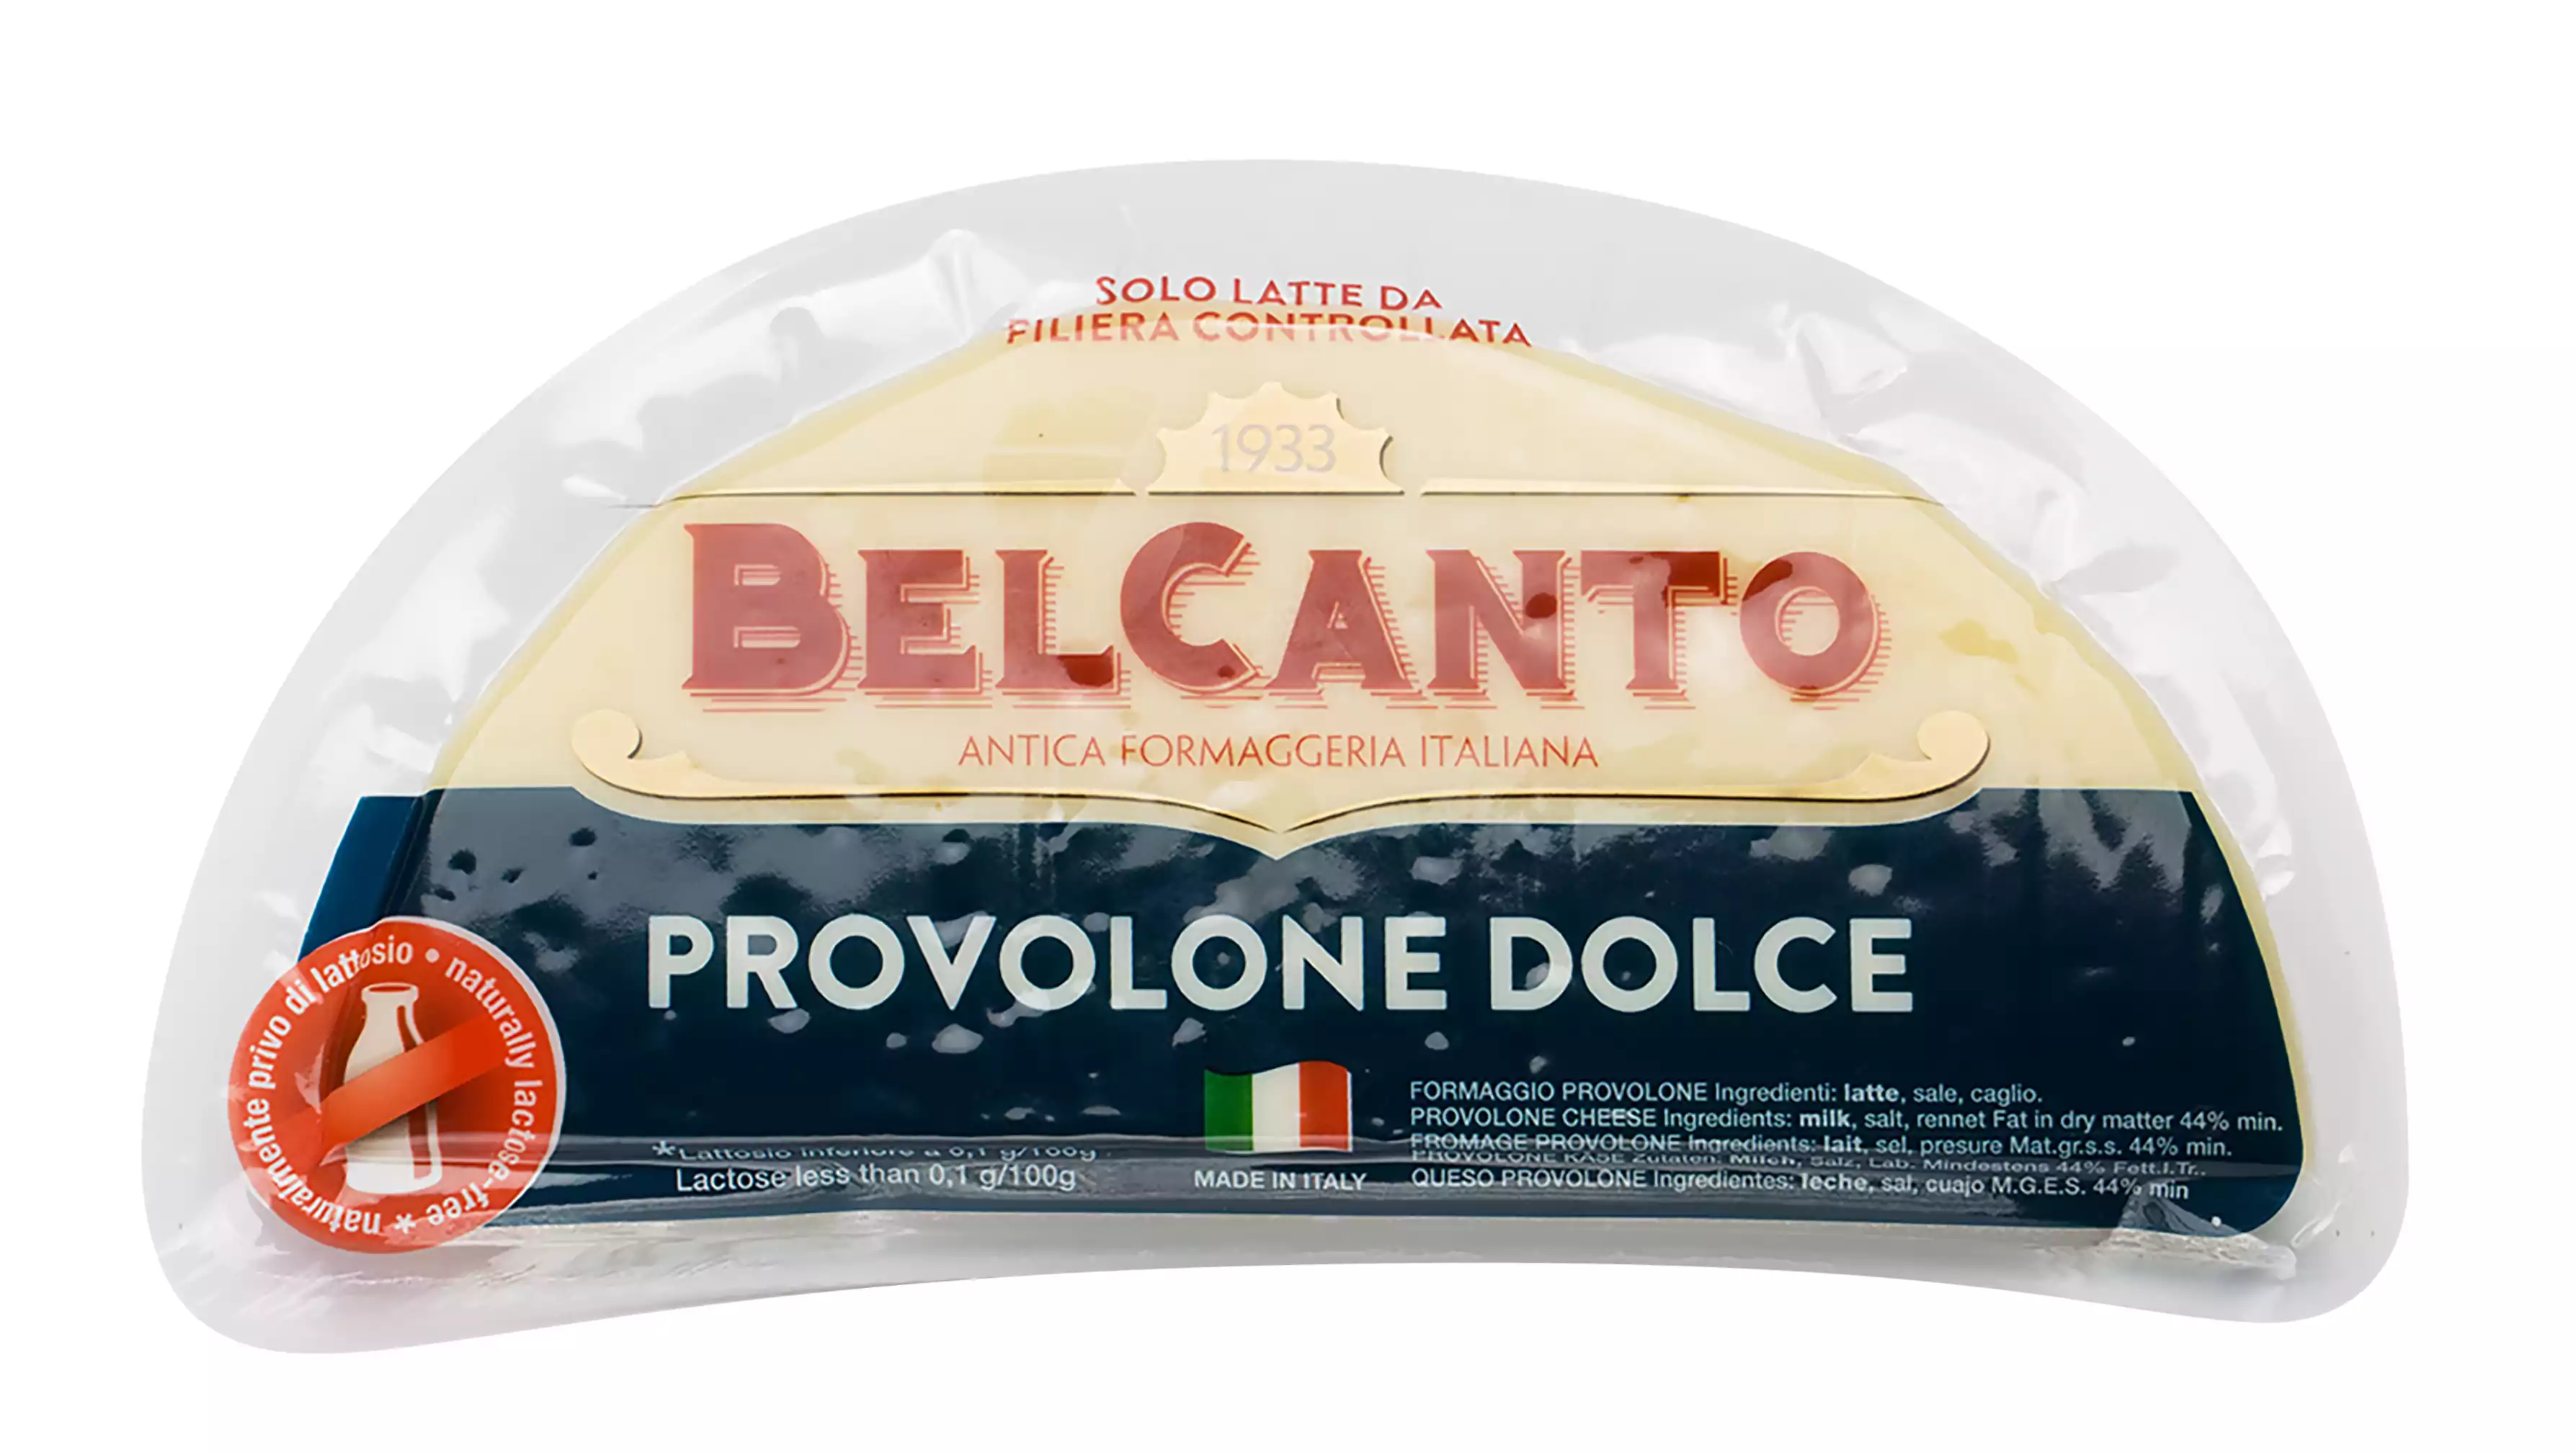 Provolone Dolce, Belcanto